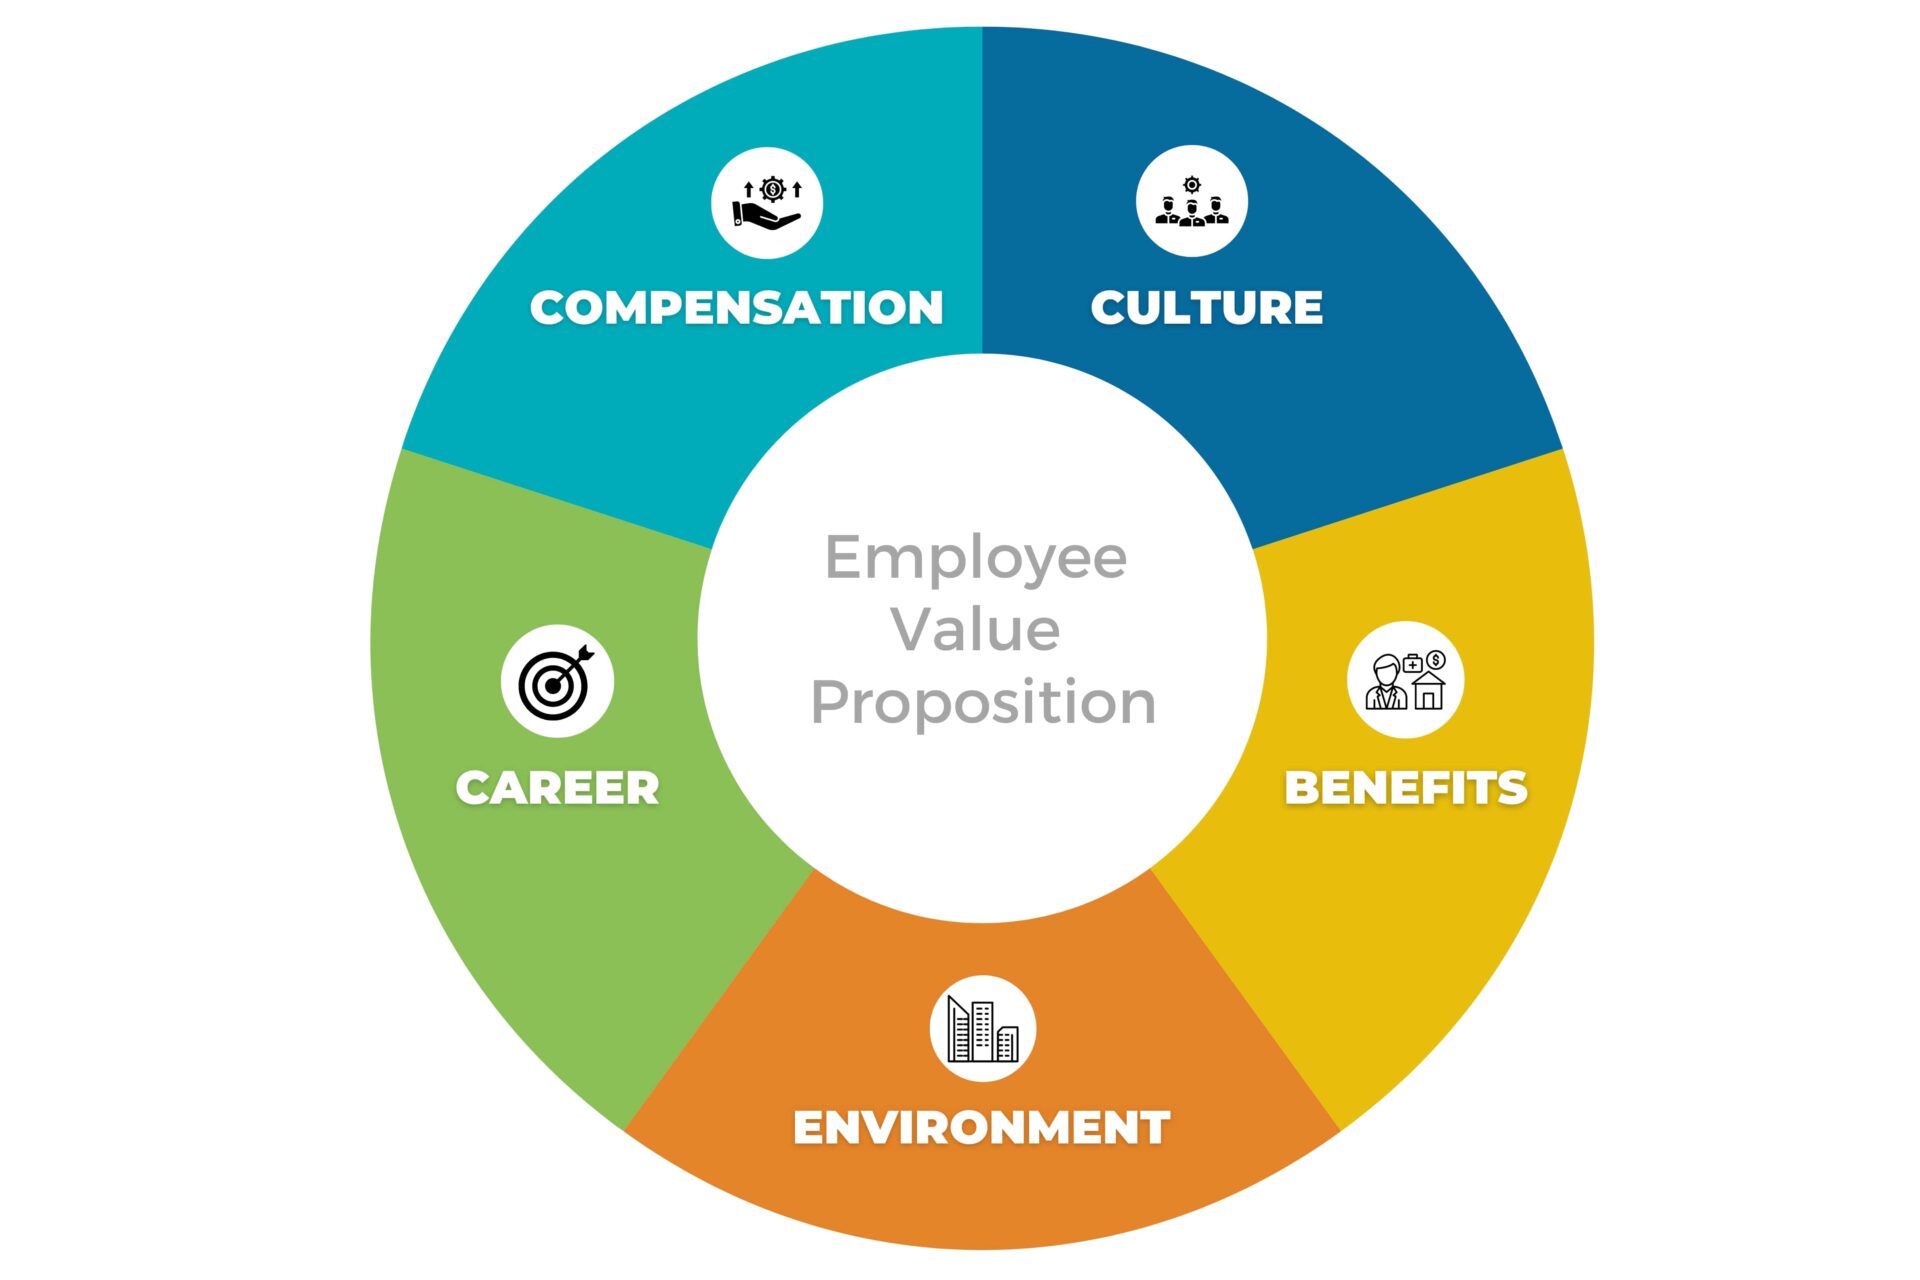 Employee value proposition pie chart for attracting and retaining talented employees